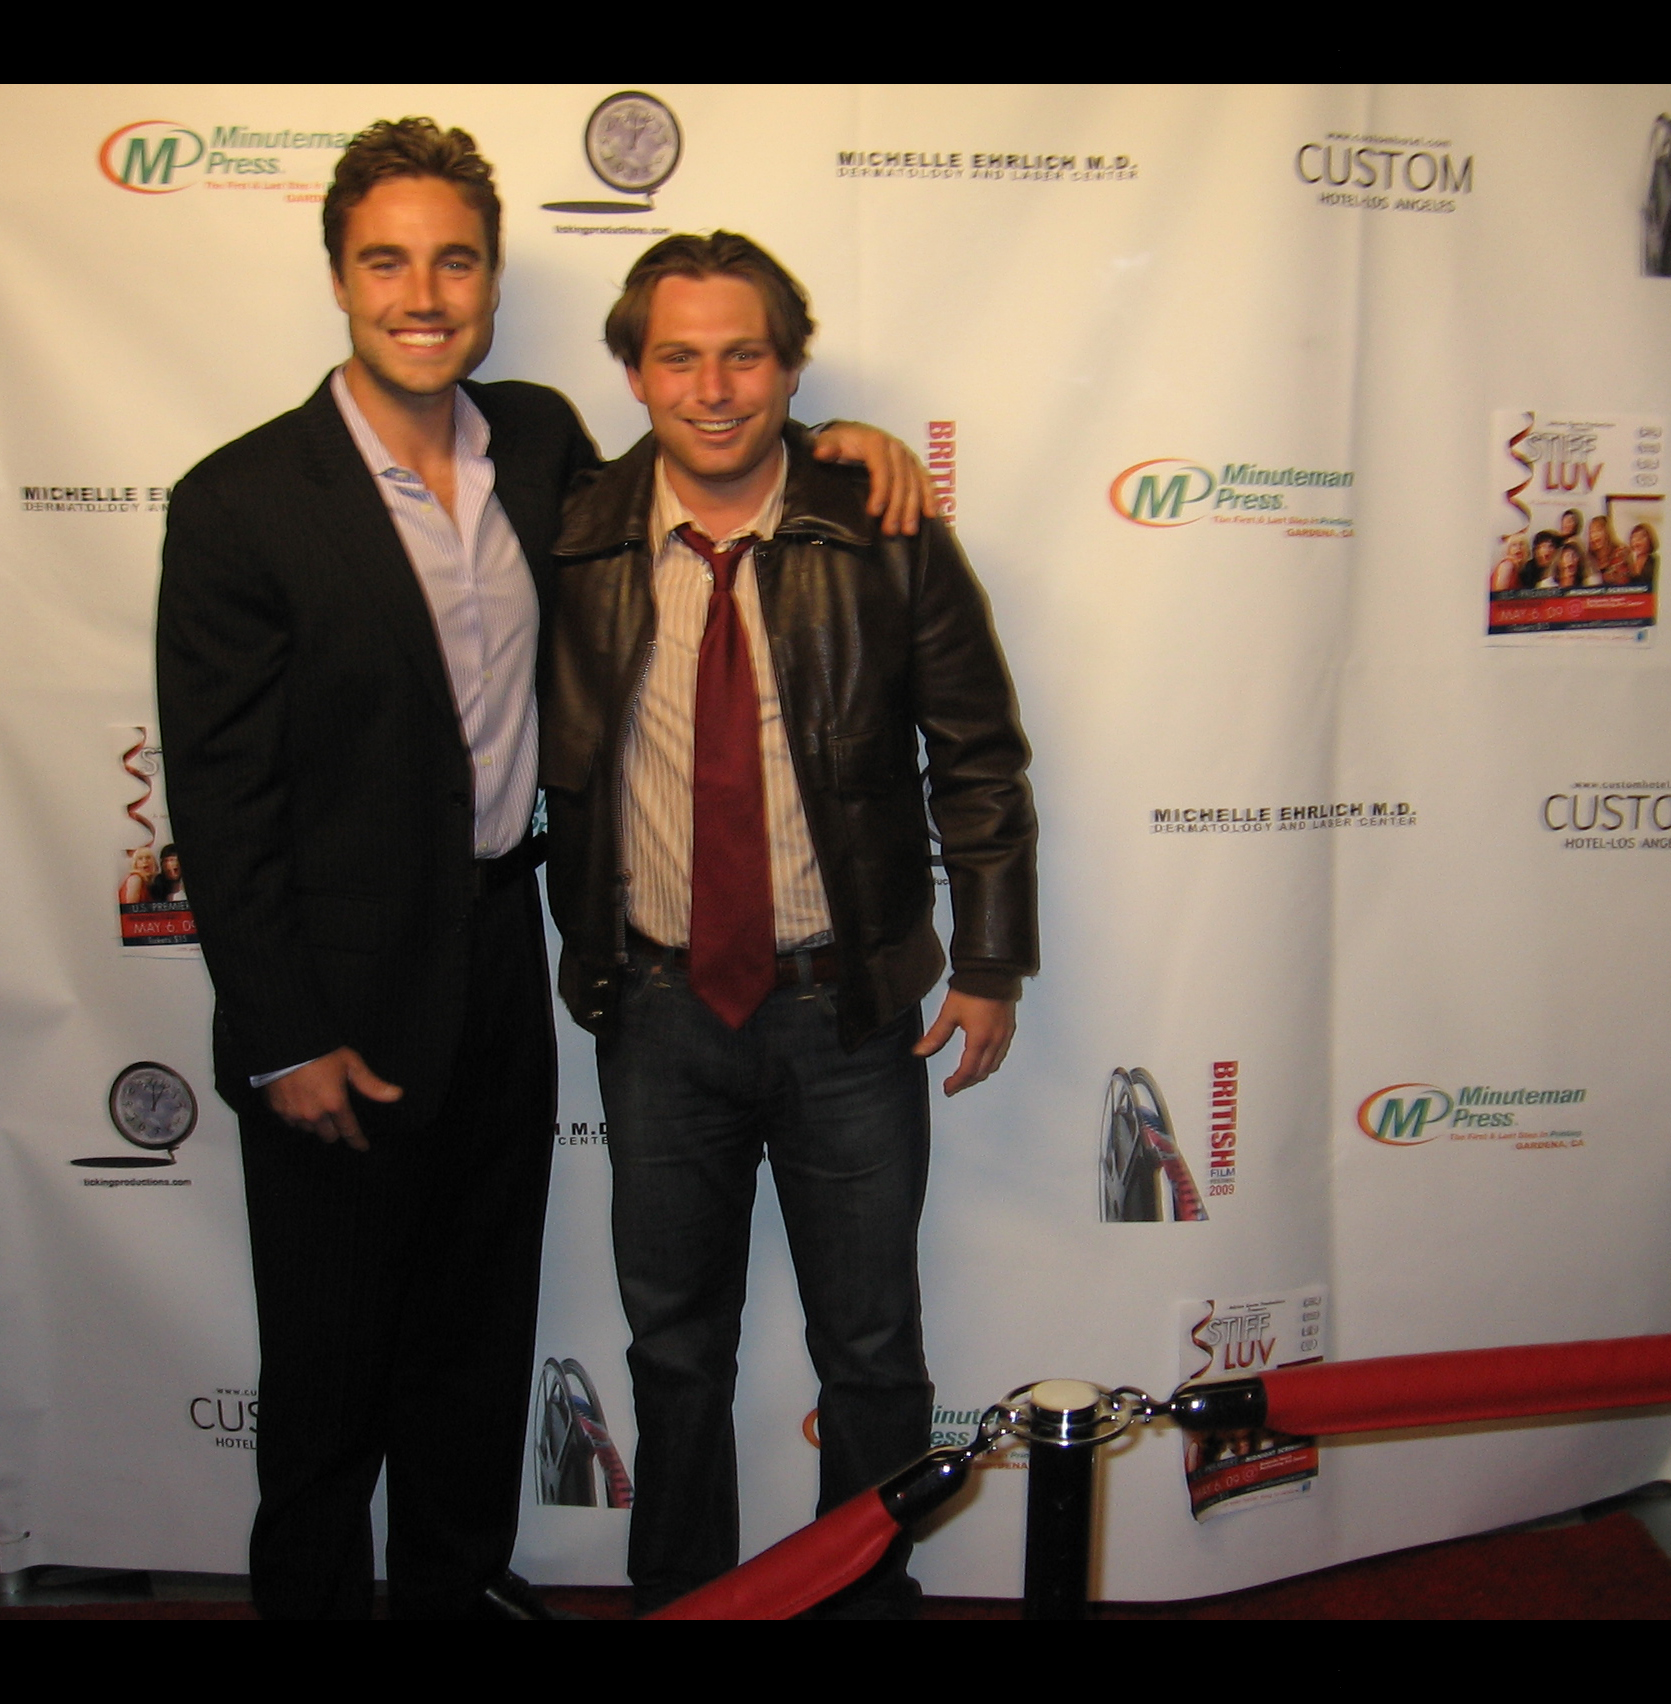 Actors Conor Gomez and Dustin Harnish on the Red Carpet at the British Film Festival Los Angeles in 2009.